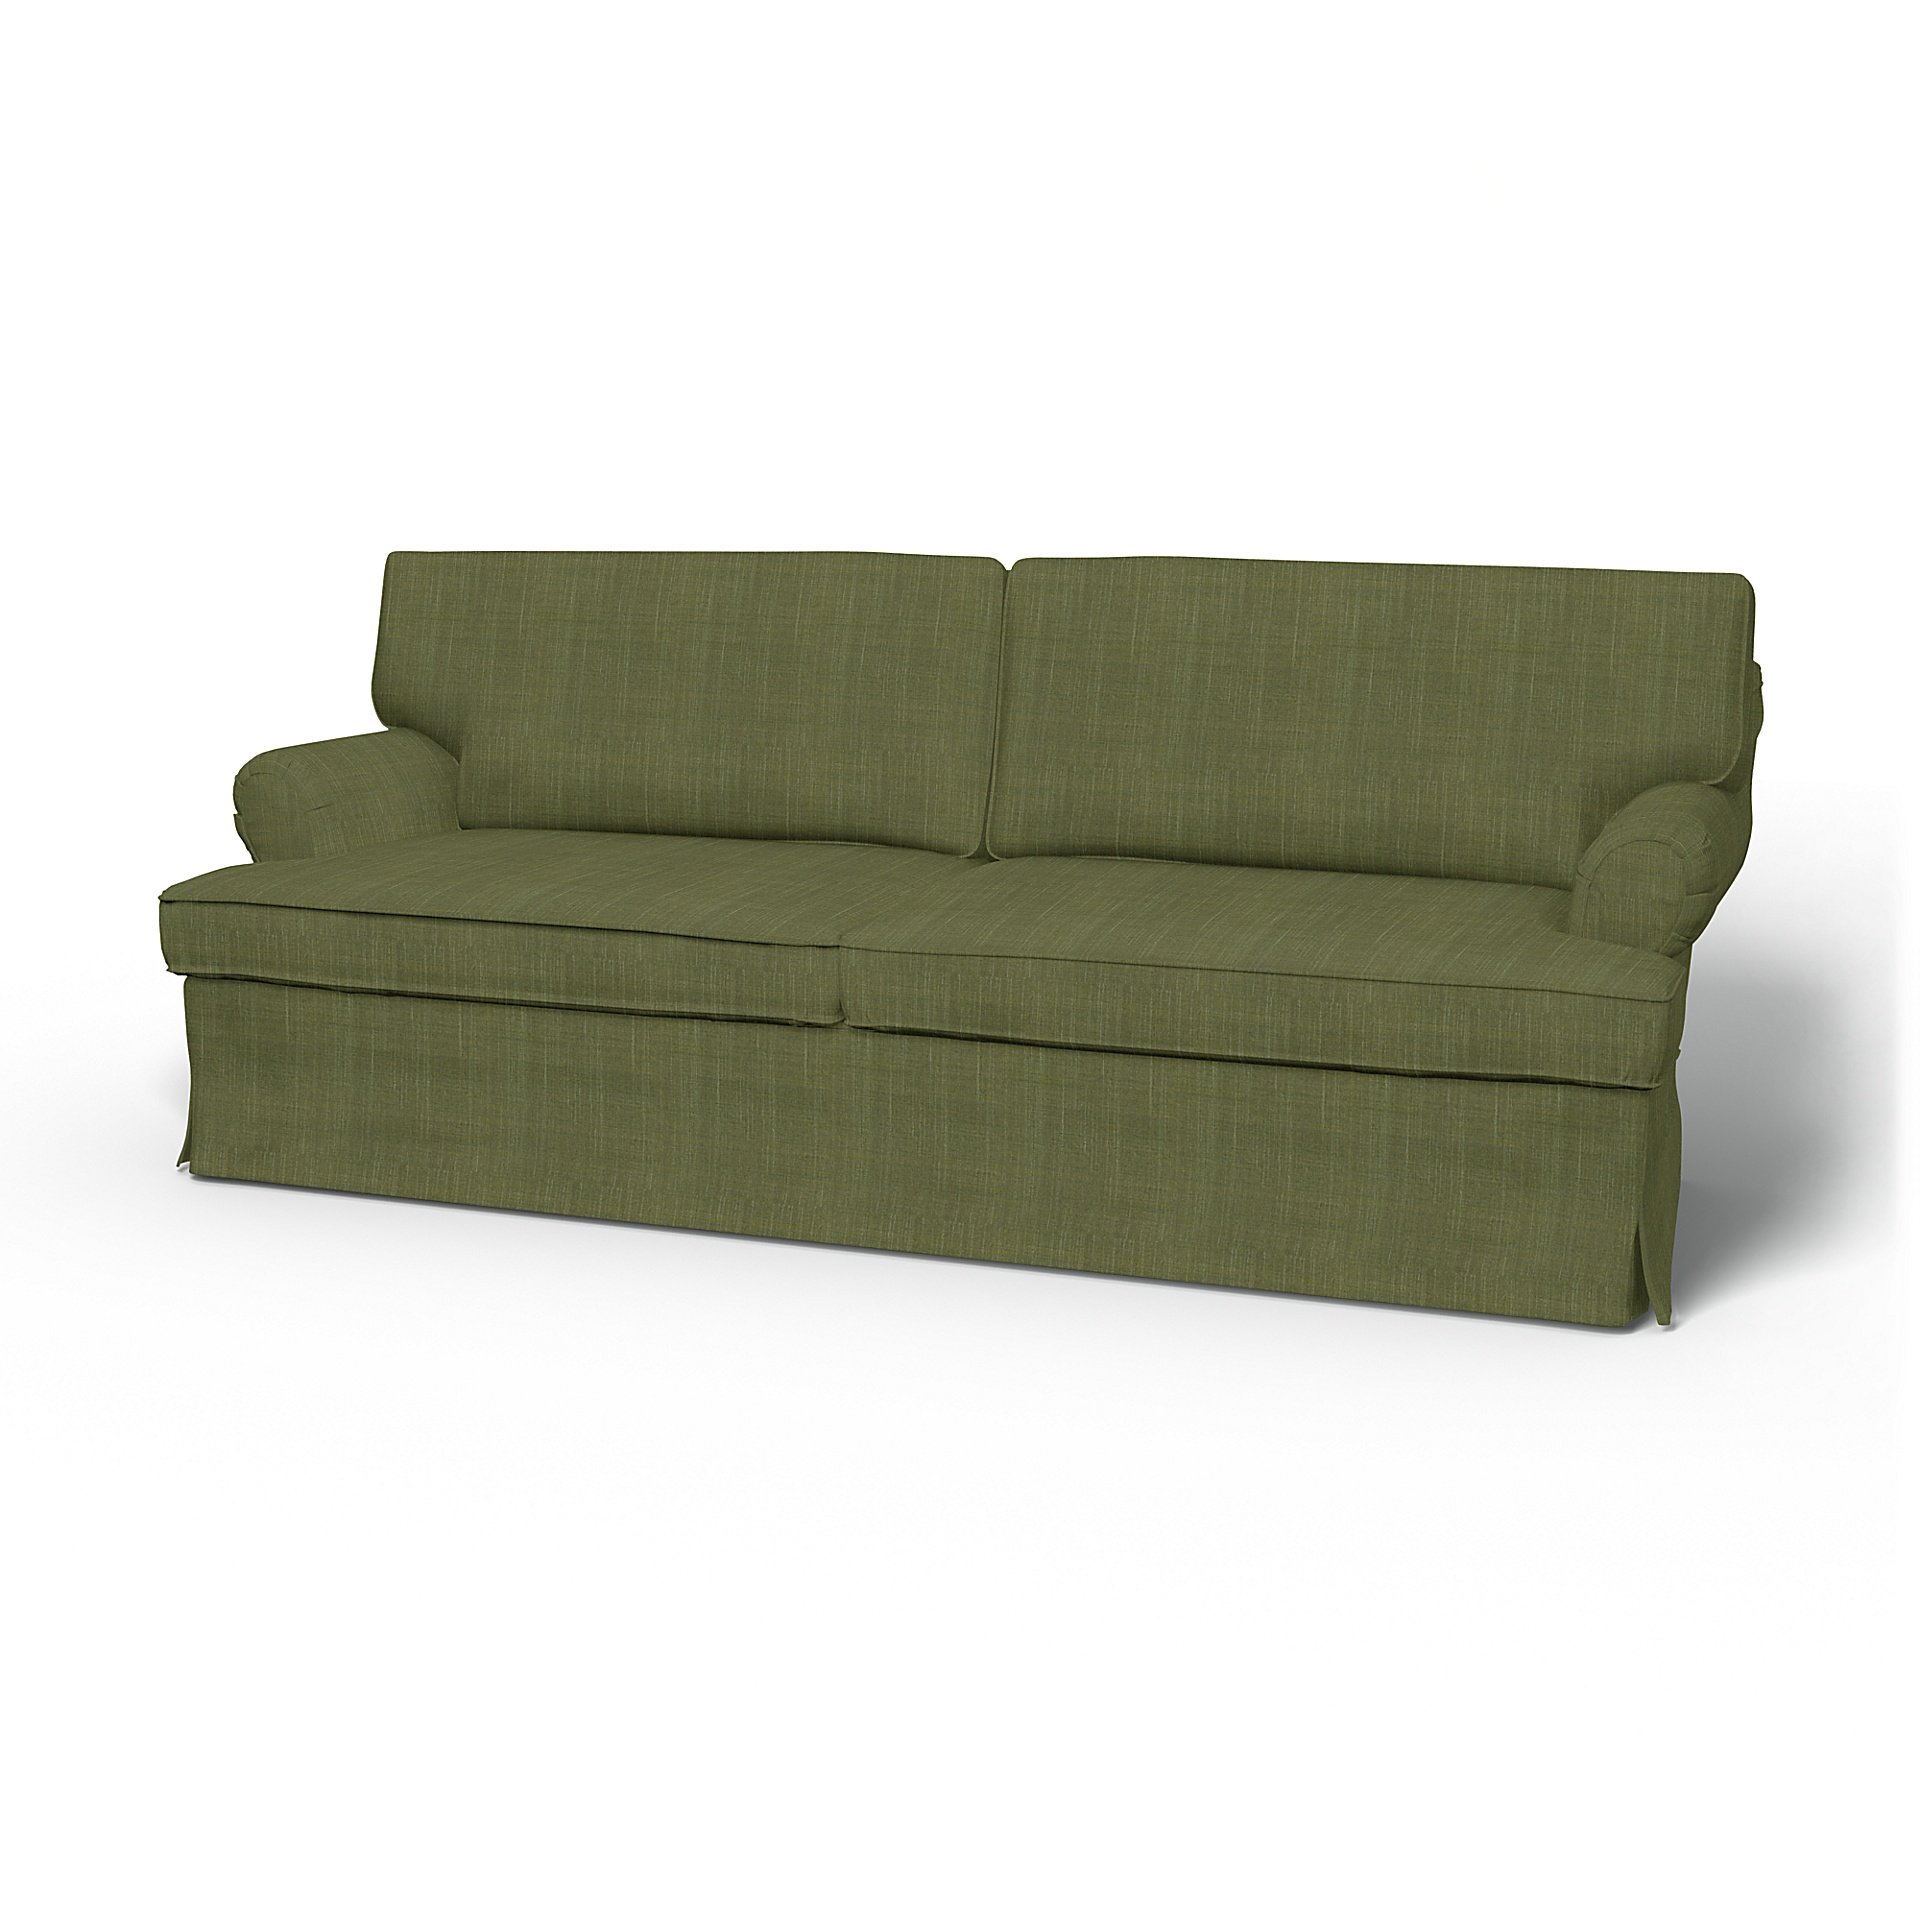 IKEA - Stockholm 3 Seater Sofa Cover (1994-2000), Moss Green, Boucle & Texture - Bemz